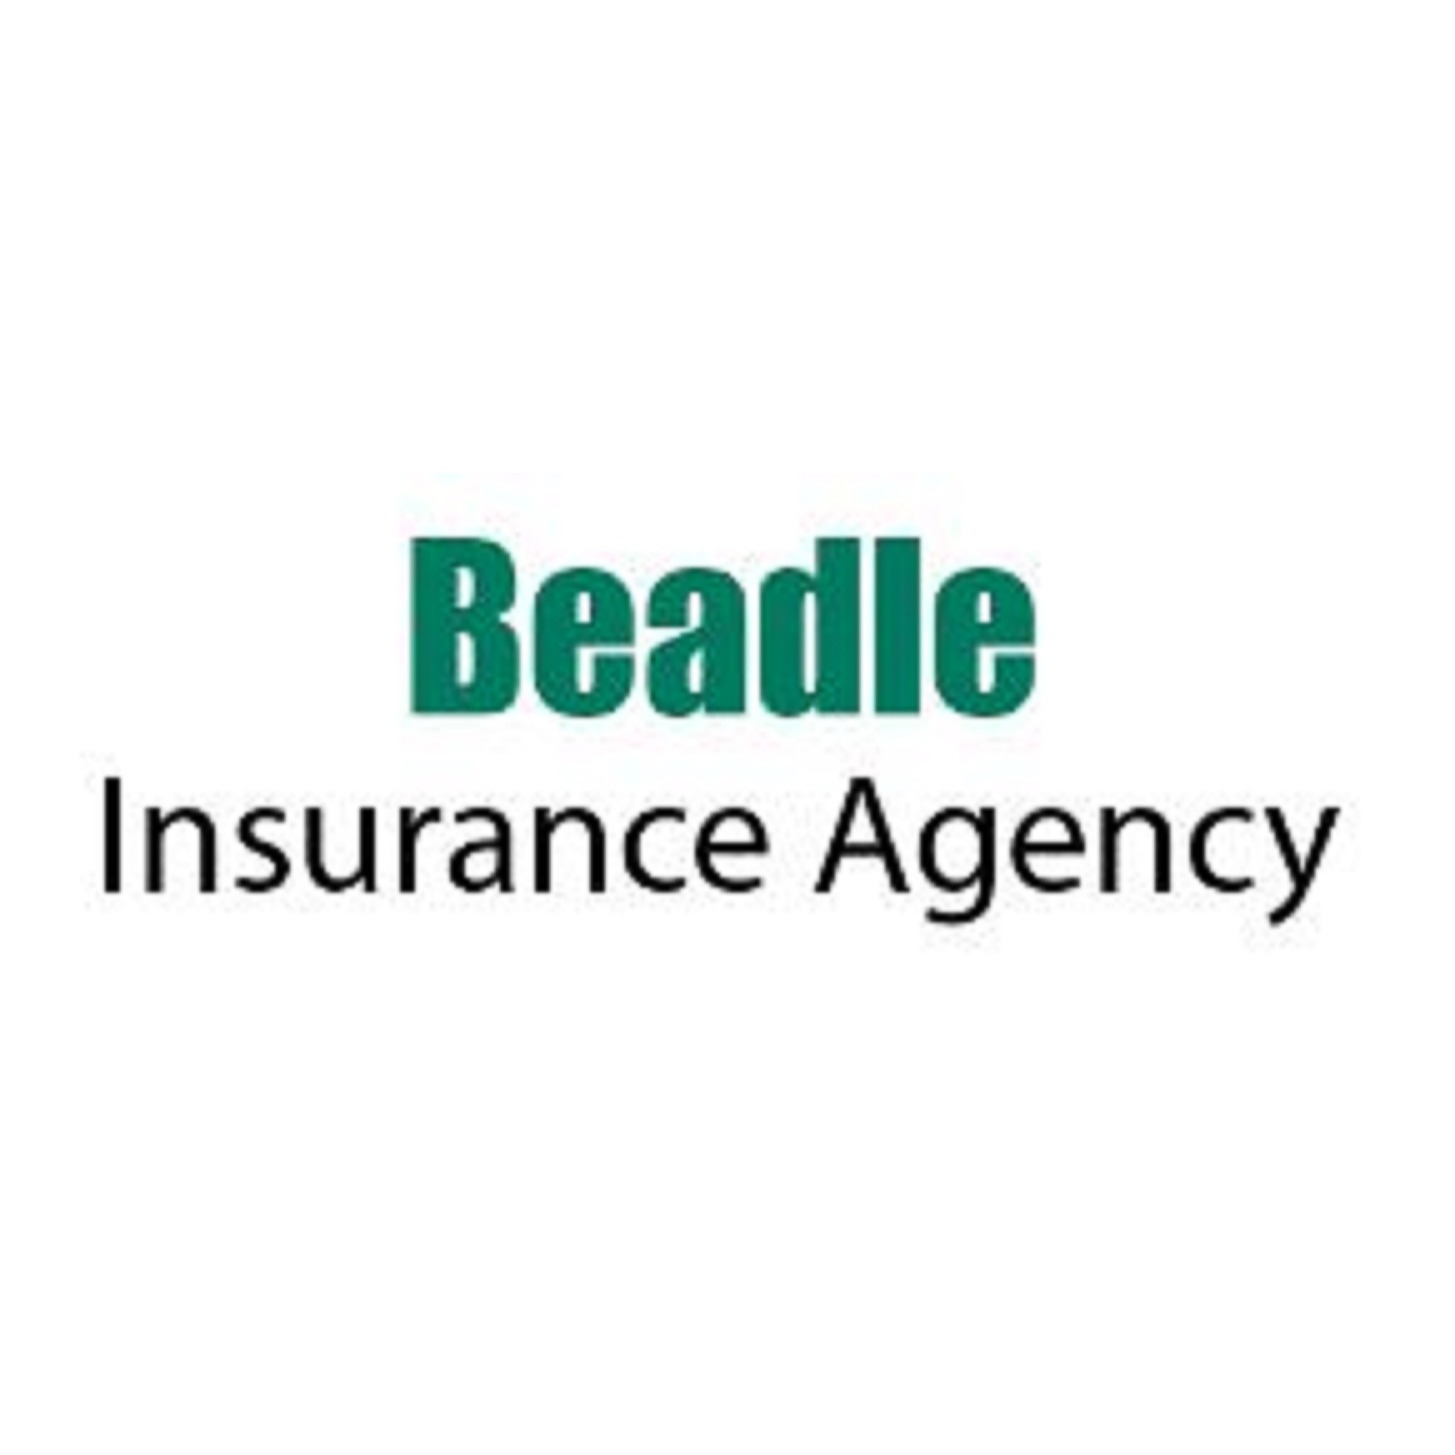 Beadle Insurance Agency - Lubbock, TX 79424 - (806)798-7900 | ShowMeLocal.com